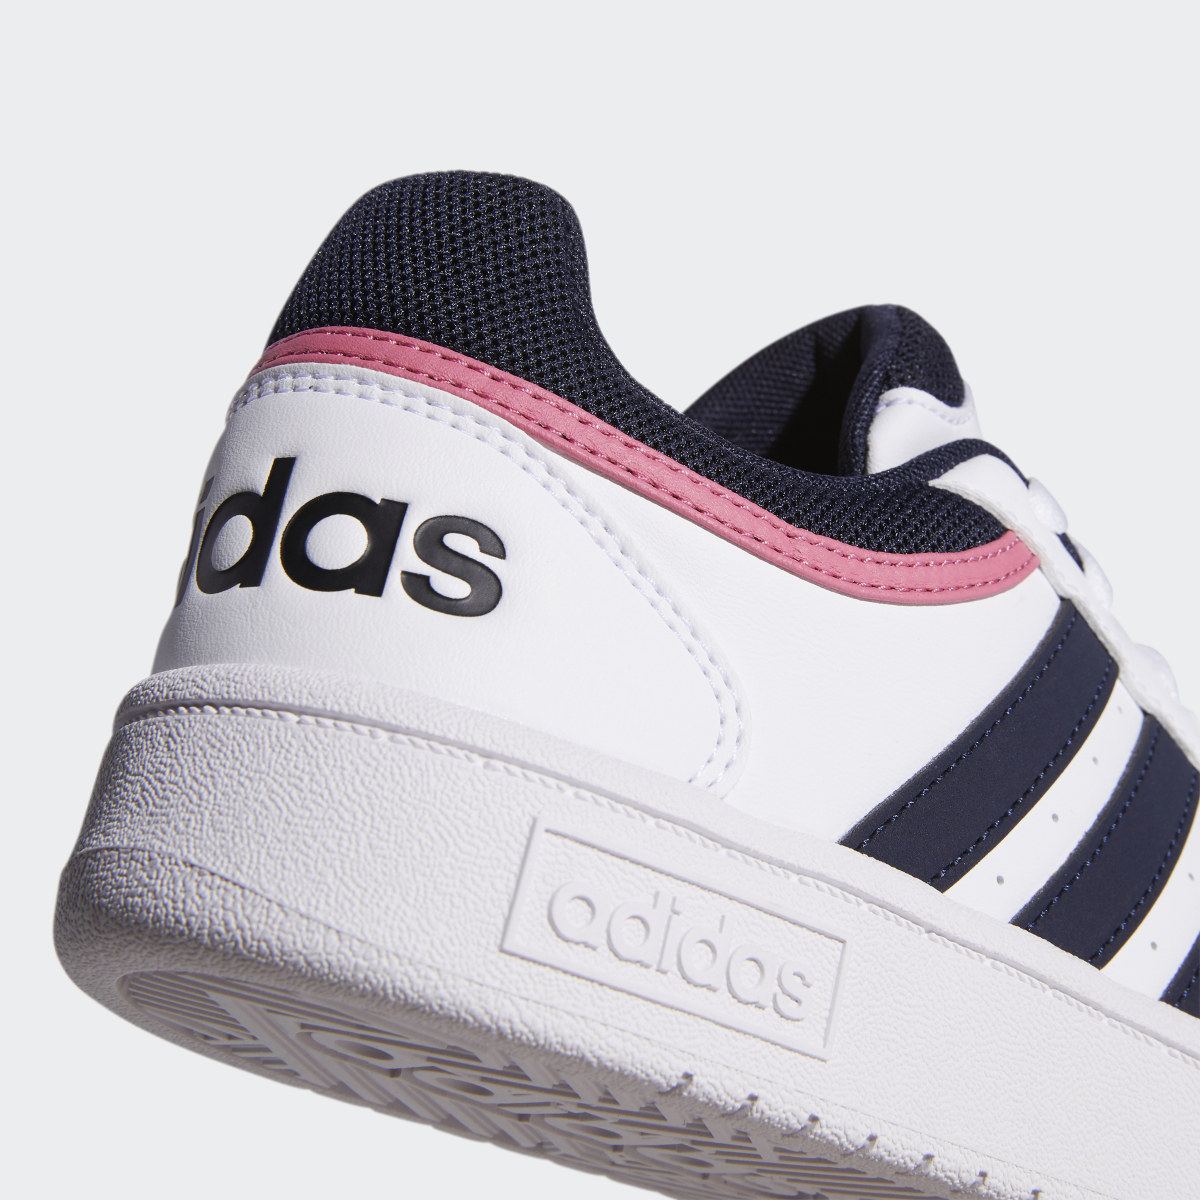 Adidas Hoops 3.0 Low Classic Shoes. 9